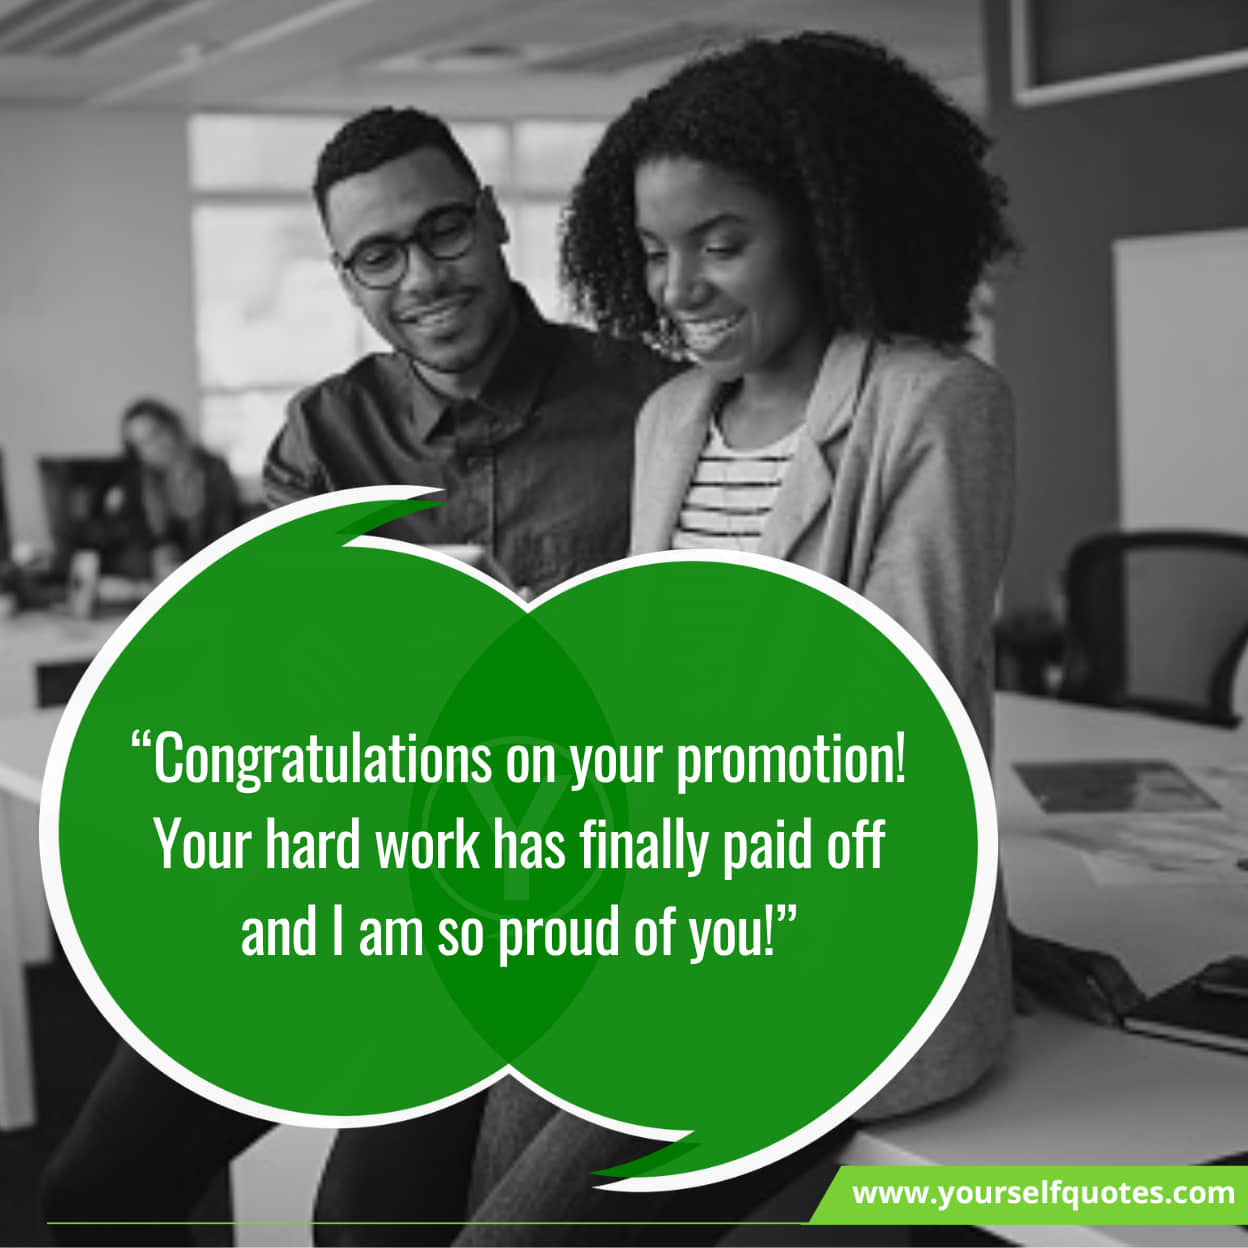 Congratulations Message On Promotion